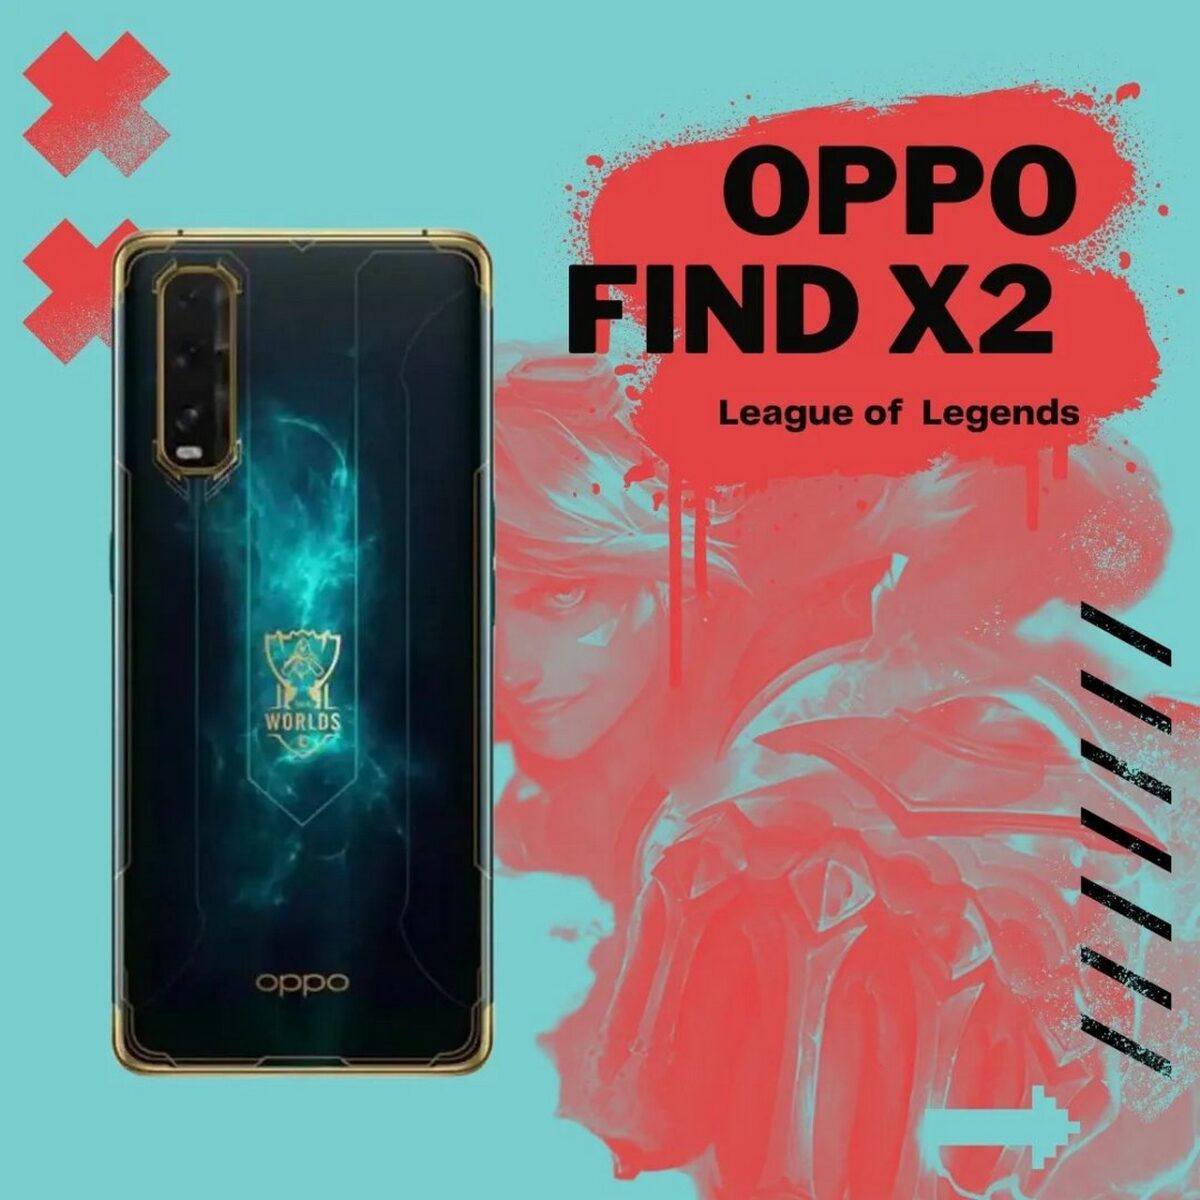 oppo find x2 league of legends